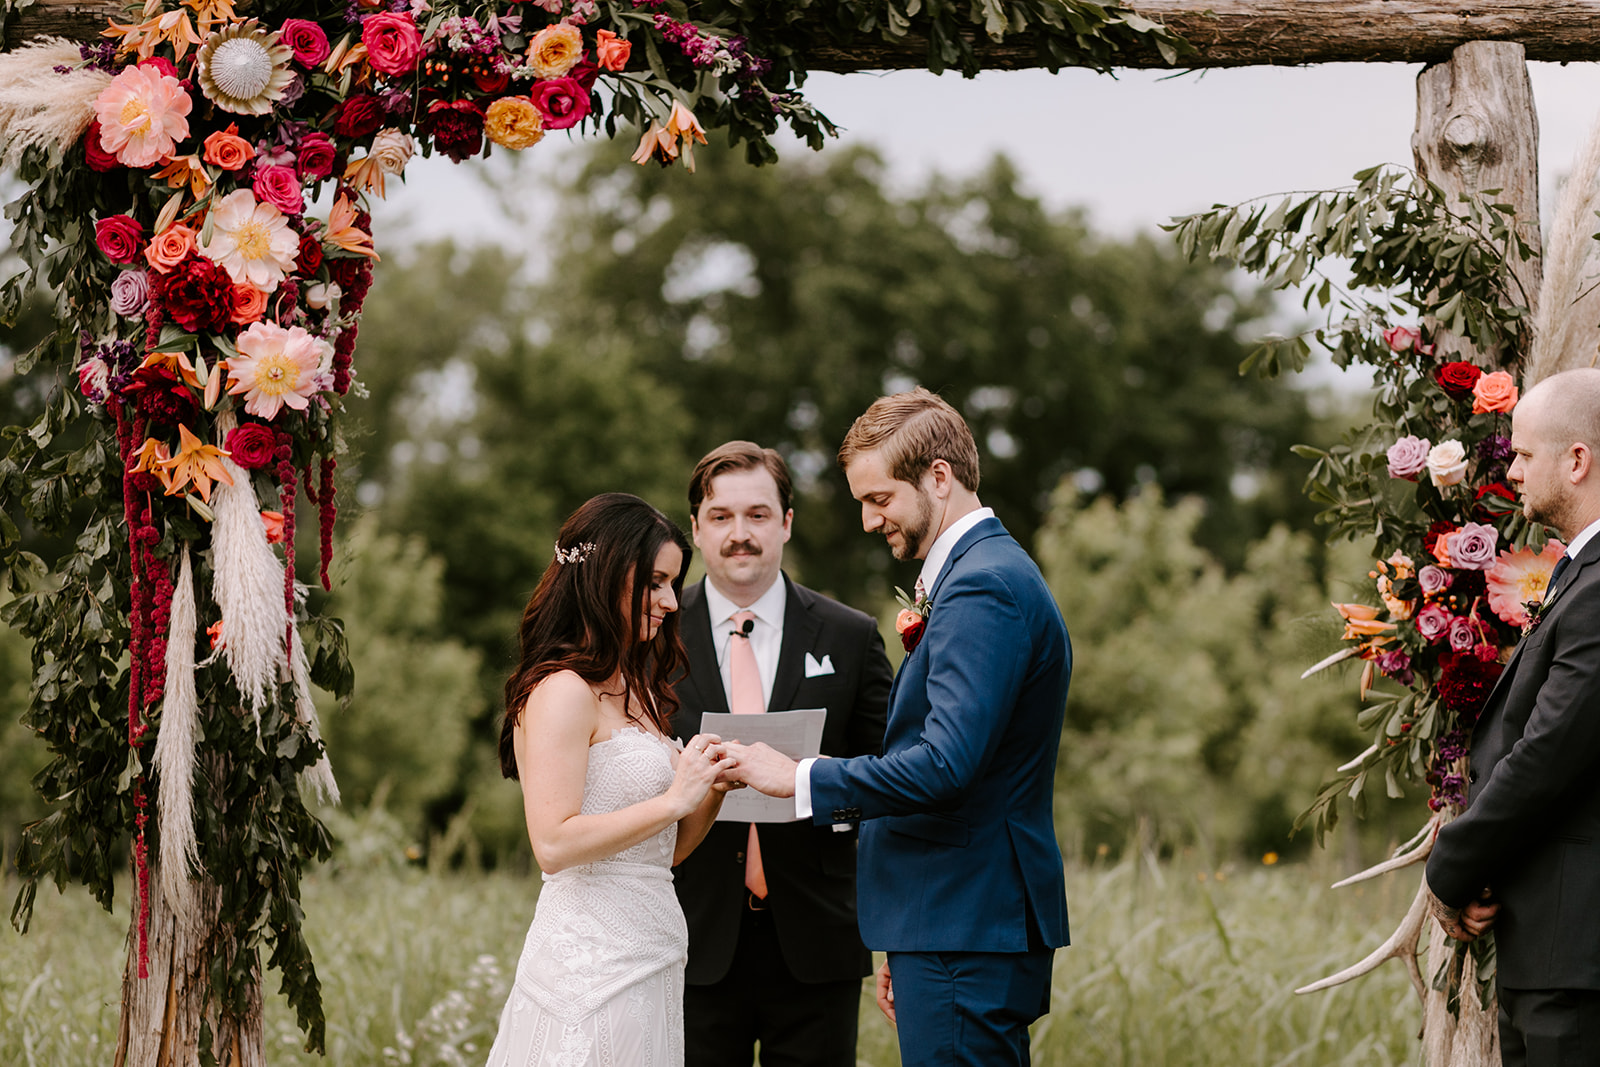 Outdoor wedding ceremony at Long Hollow Gardens